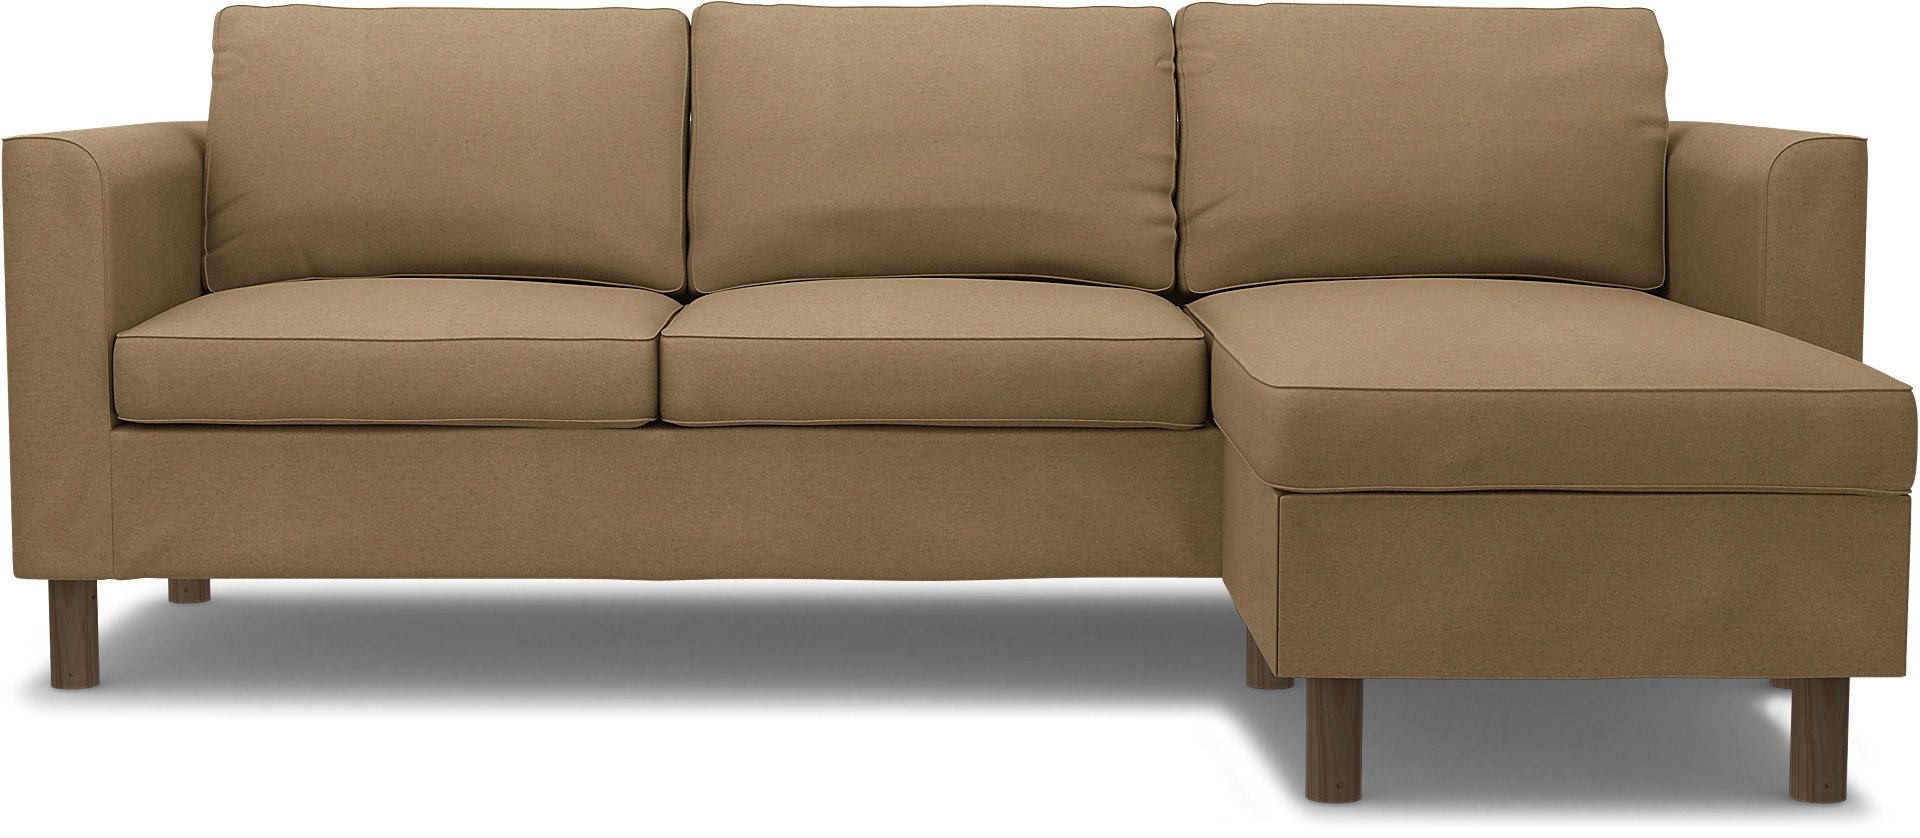 IKEA - Parup 3 Seater with chaise longue, Sand, Wool - Bemz